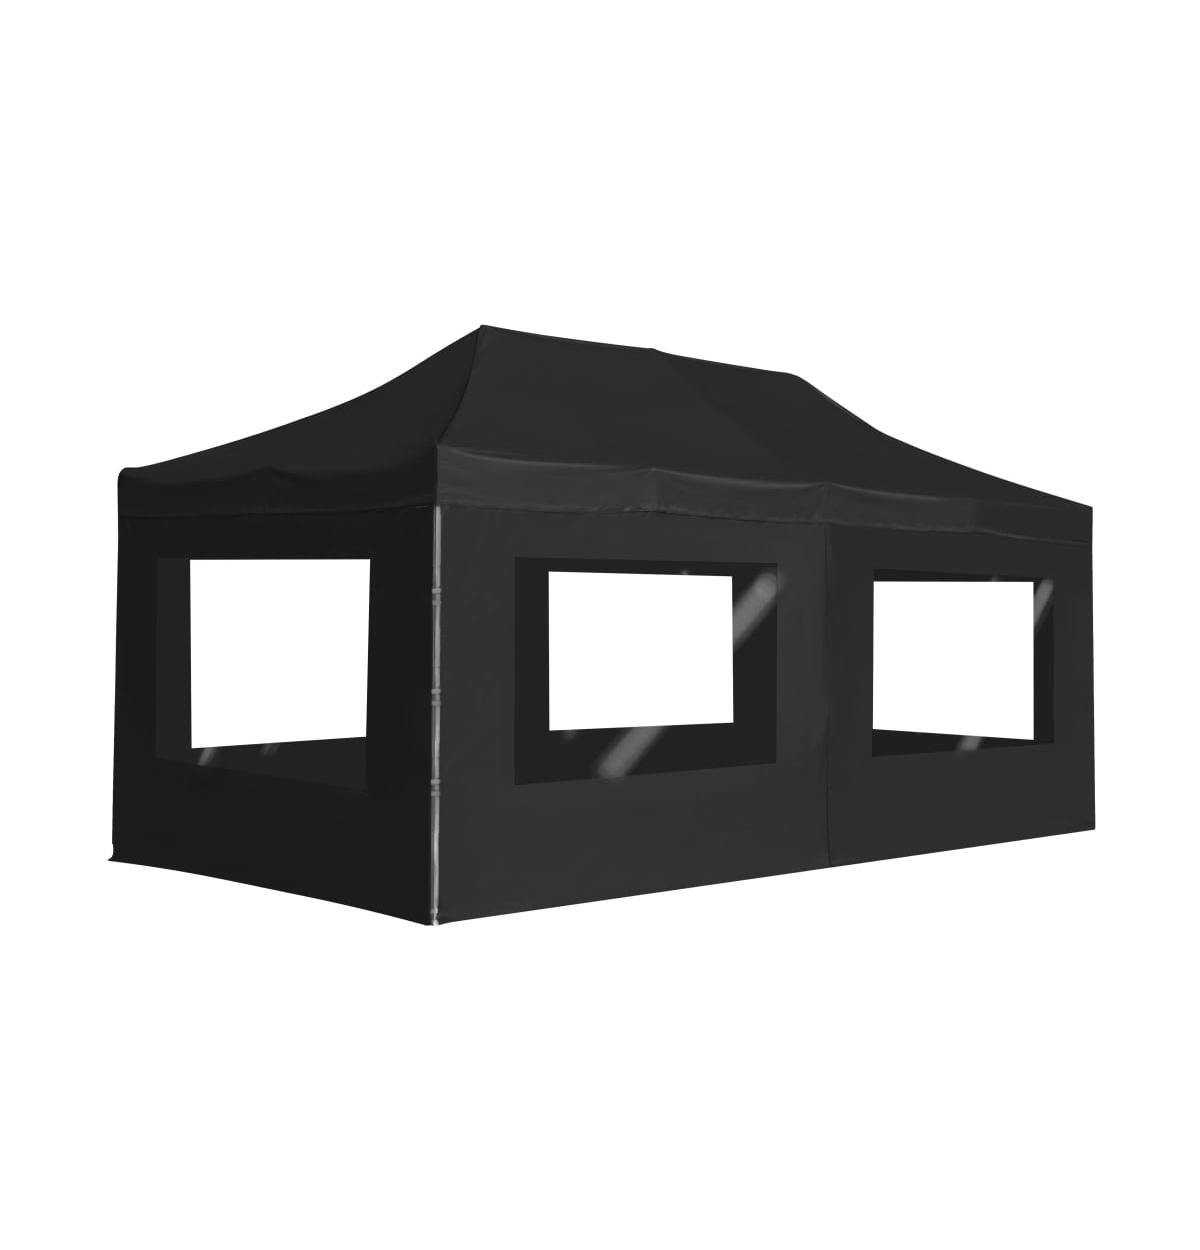 Professional Folding Party Tent with Walls Aluminum 19.7'x9.8' Anthracite - Dark Grey